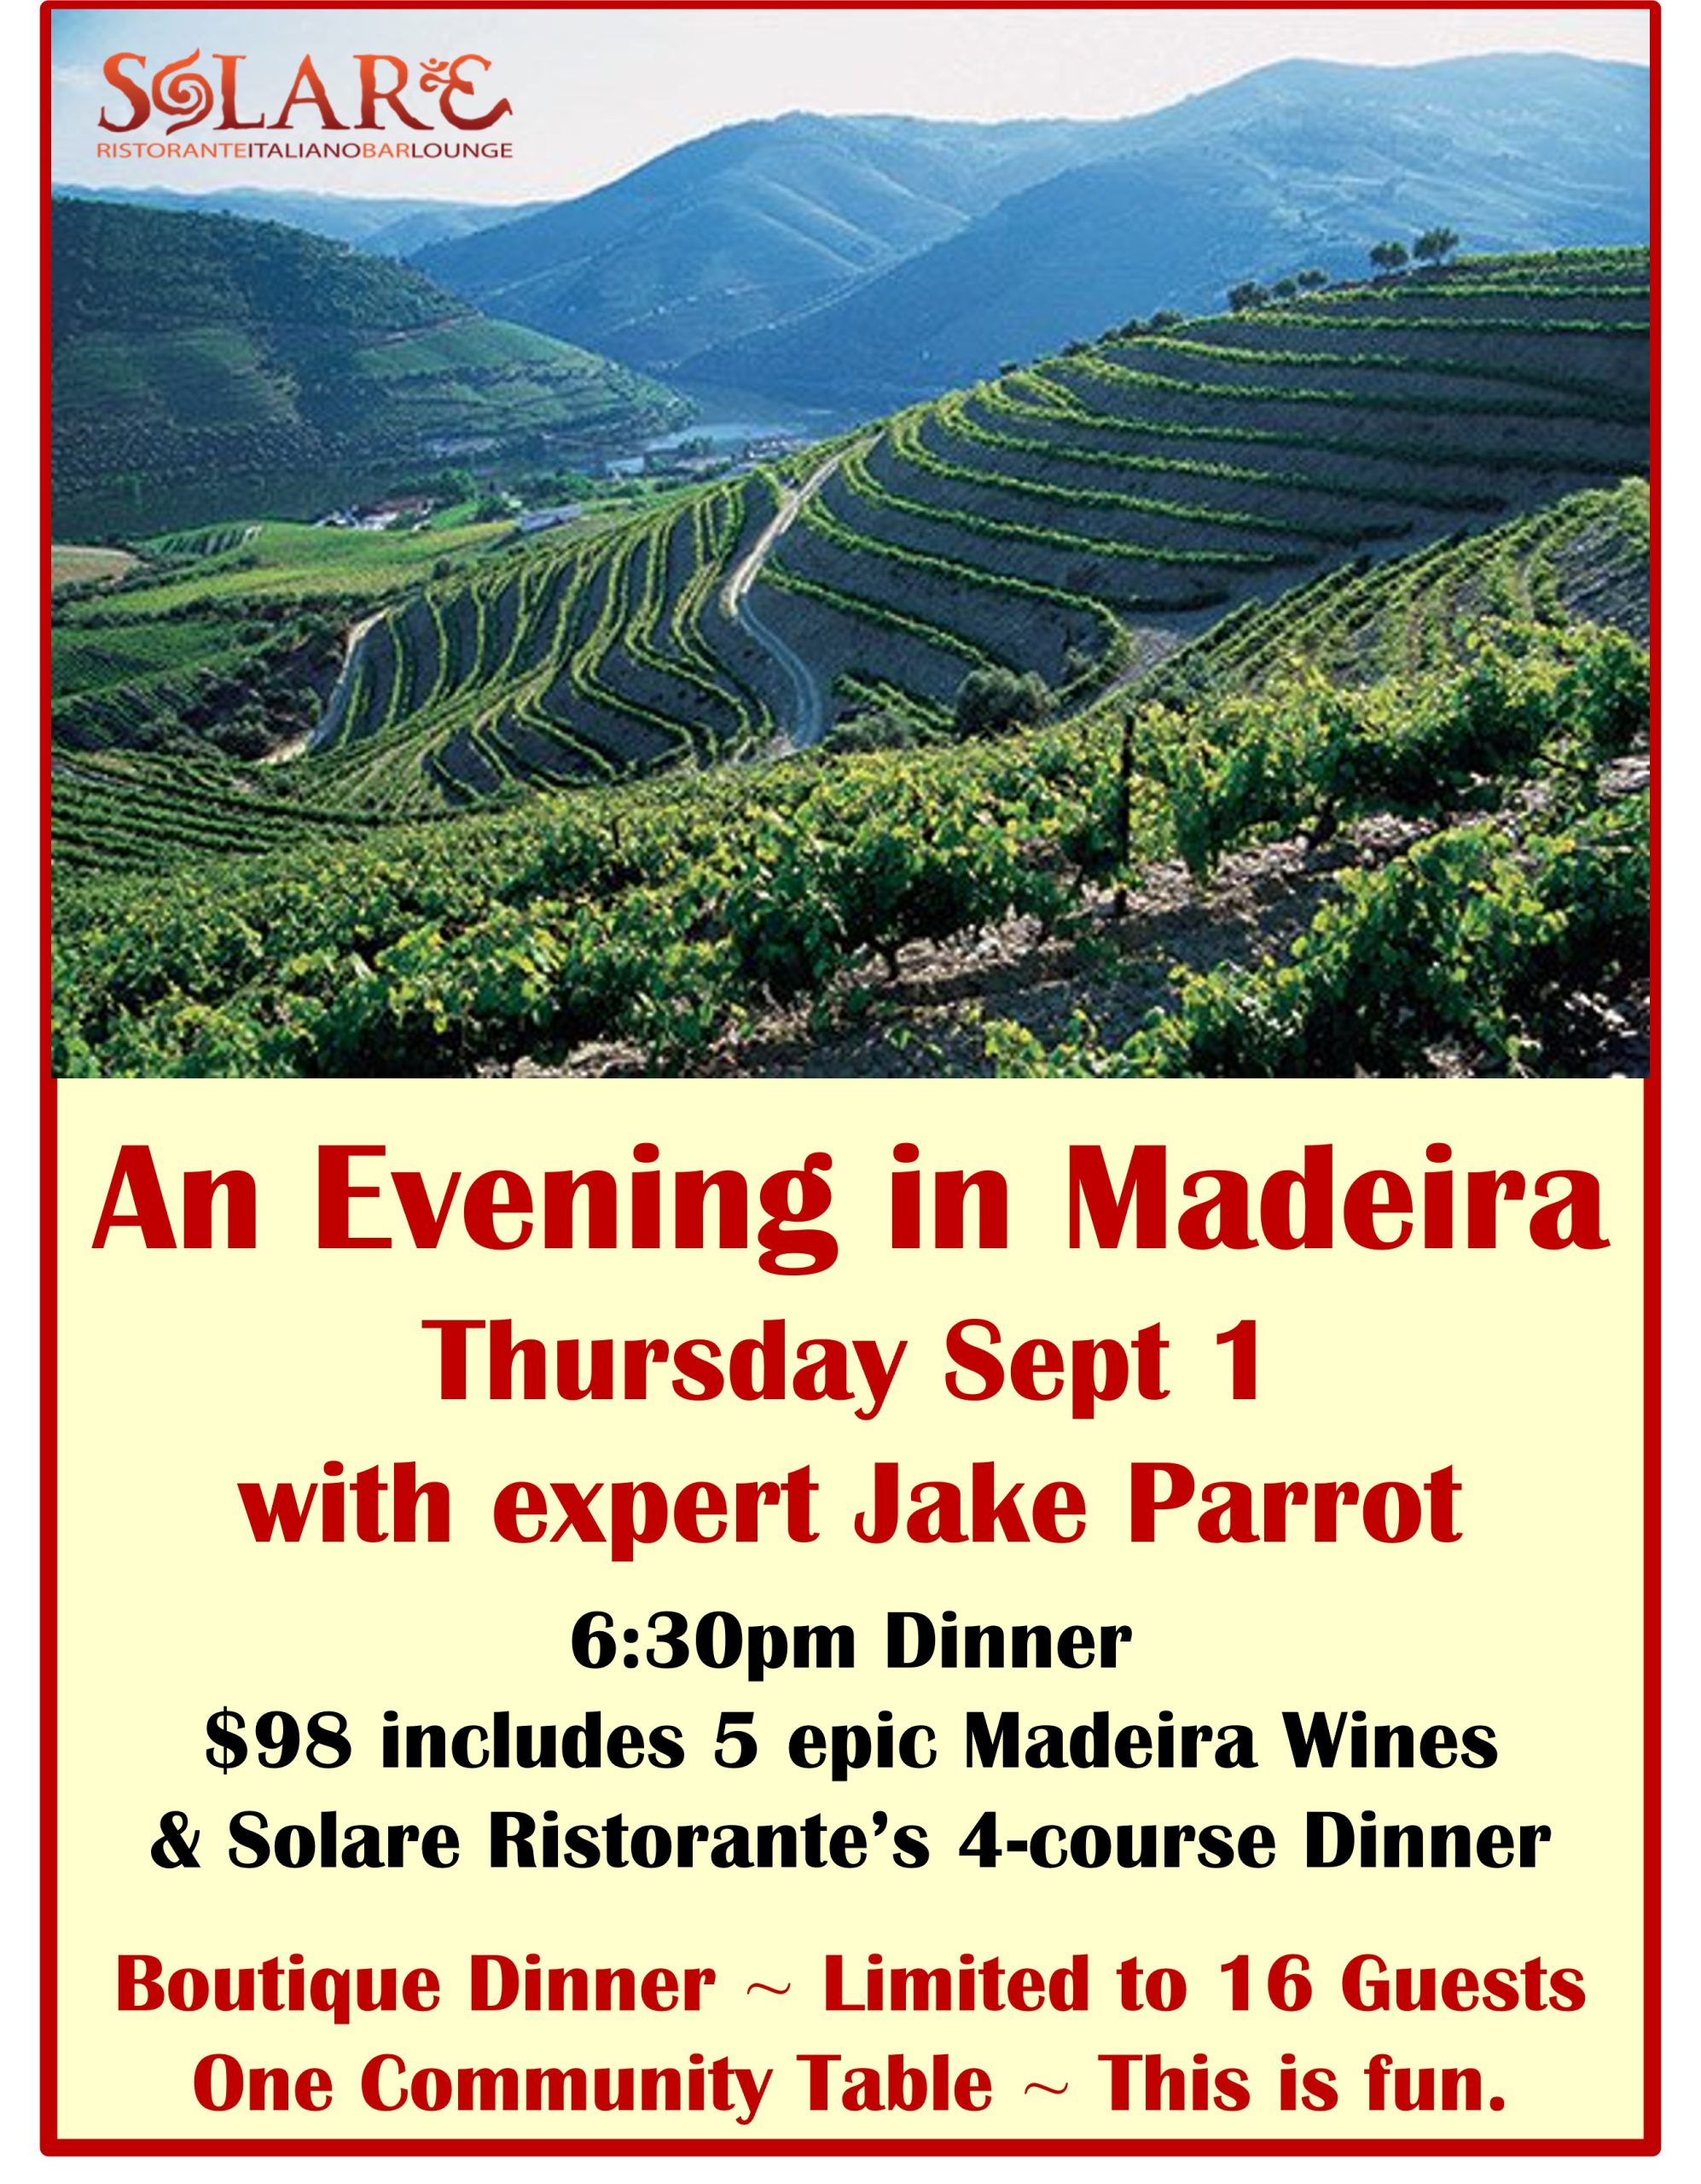 <a id="Solare-Madeira-2022-Wine-Dinner"></a>A Dinner & Evening with Madeira at Solare